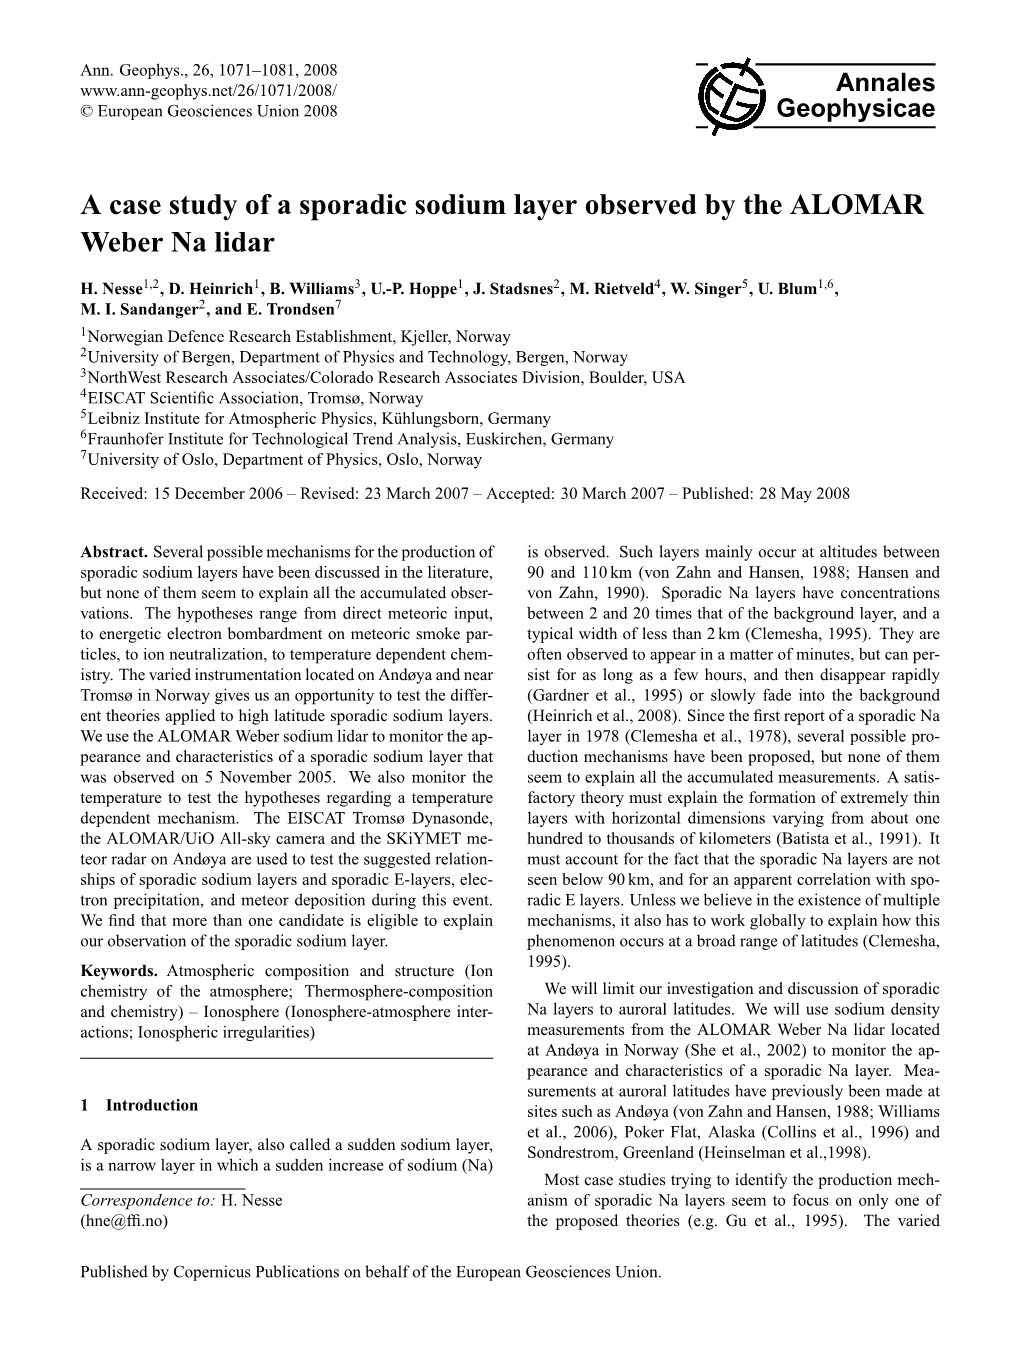 A Case Study of a Sporadic Sodium Layer Observed by the ALOMAR Weber Na Lidar